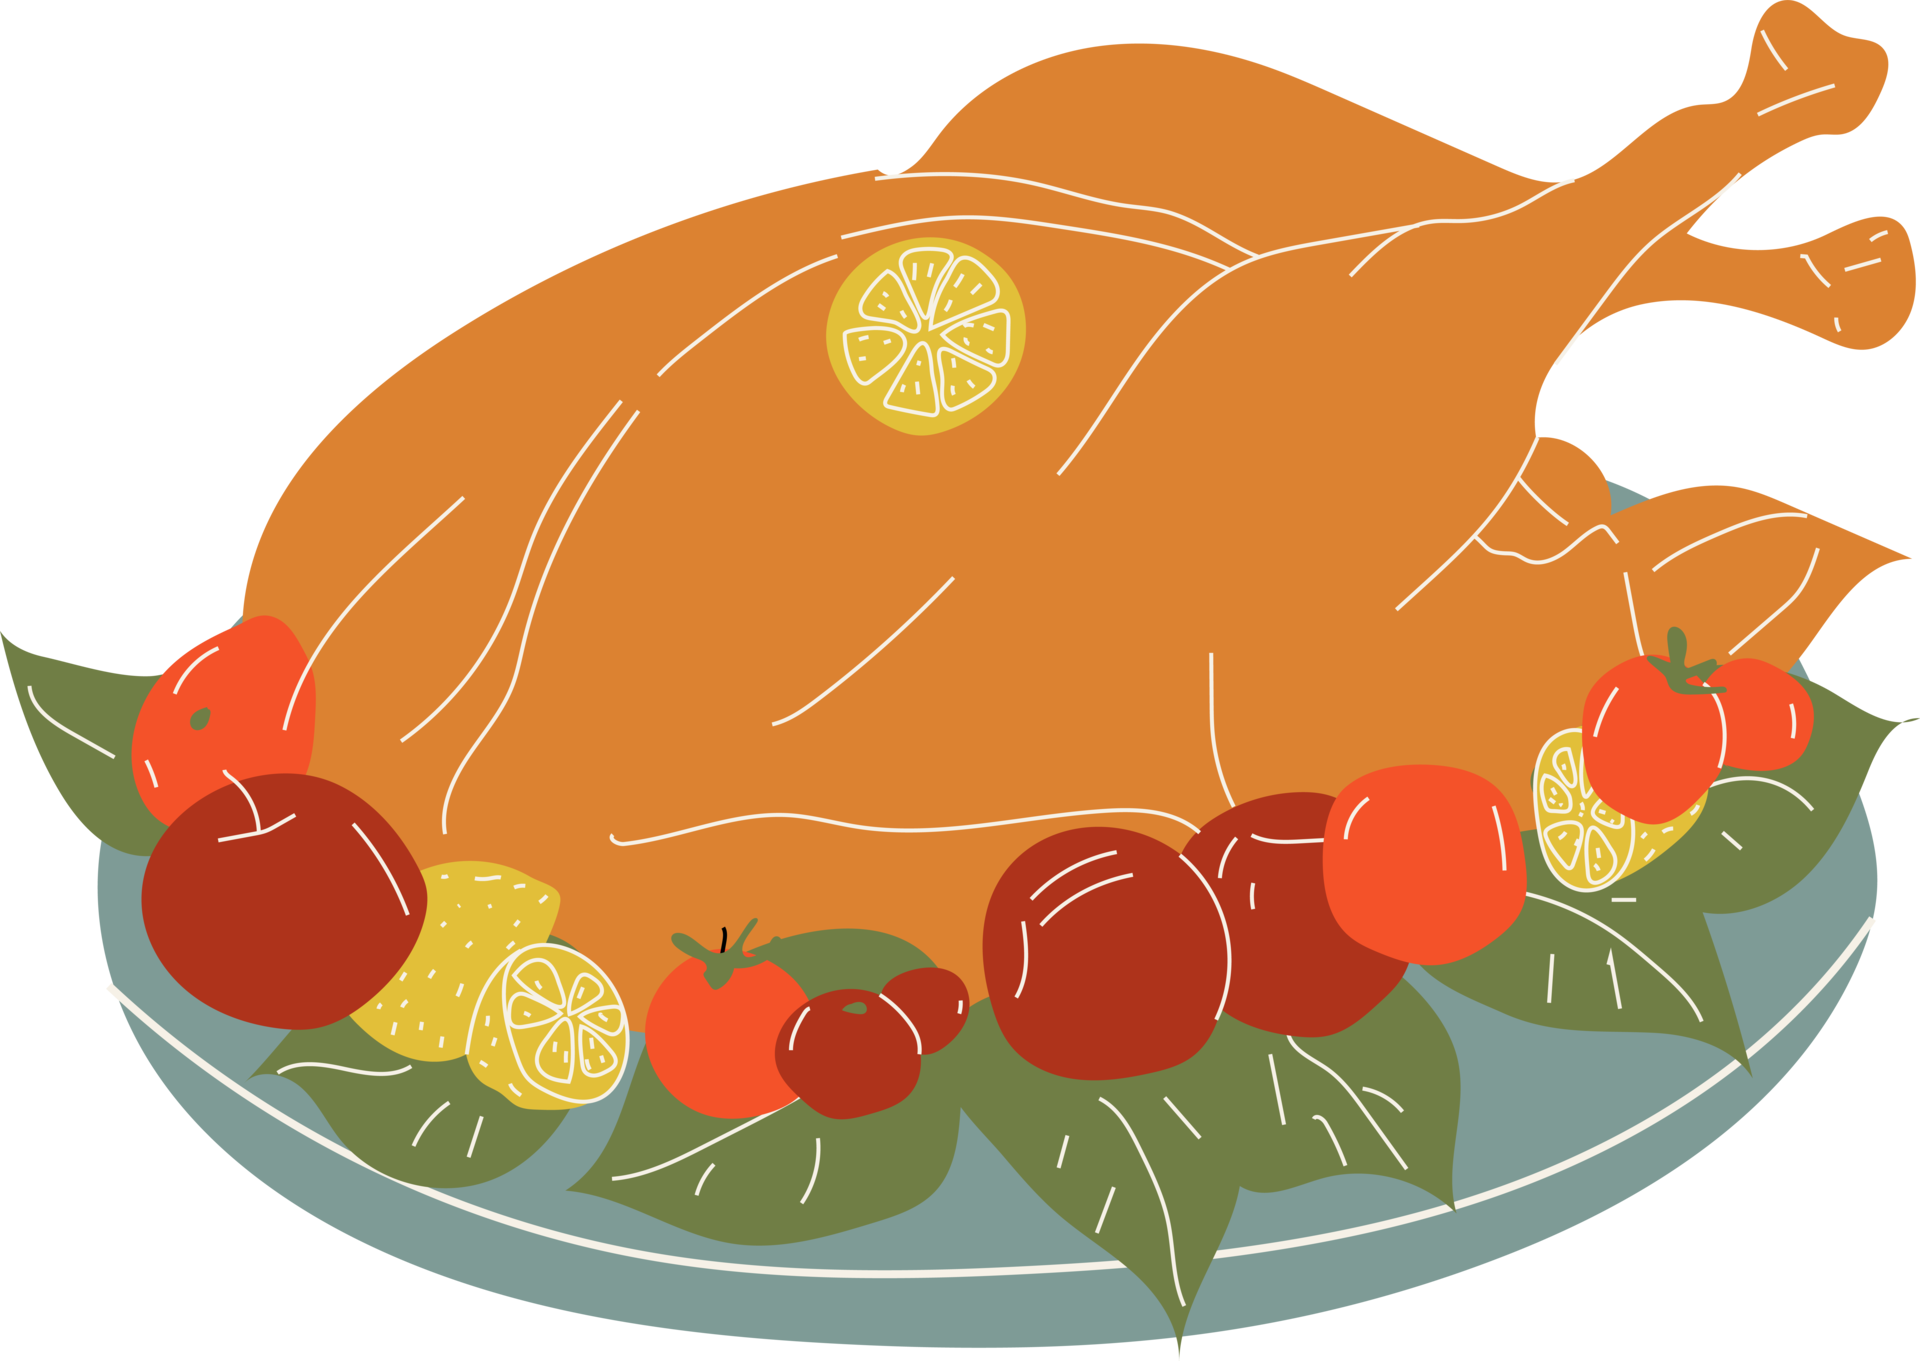 Free Illustration of baked turkey for thanksgiving day. in PNG cartoon  style. All elements are isolated 15098759 PNG with Transparent Background